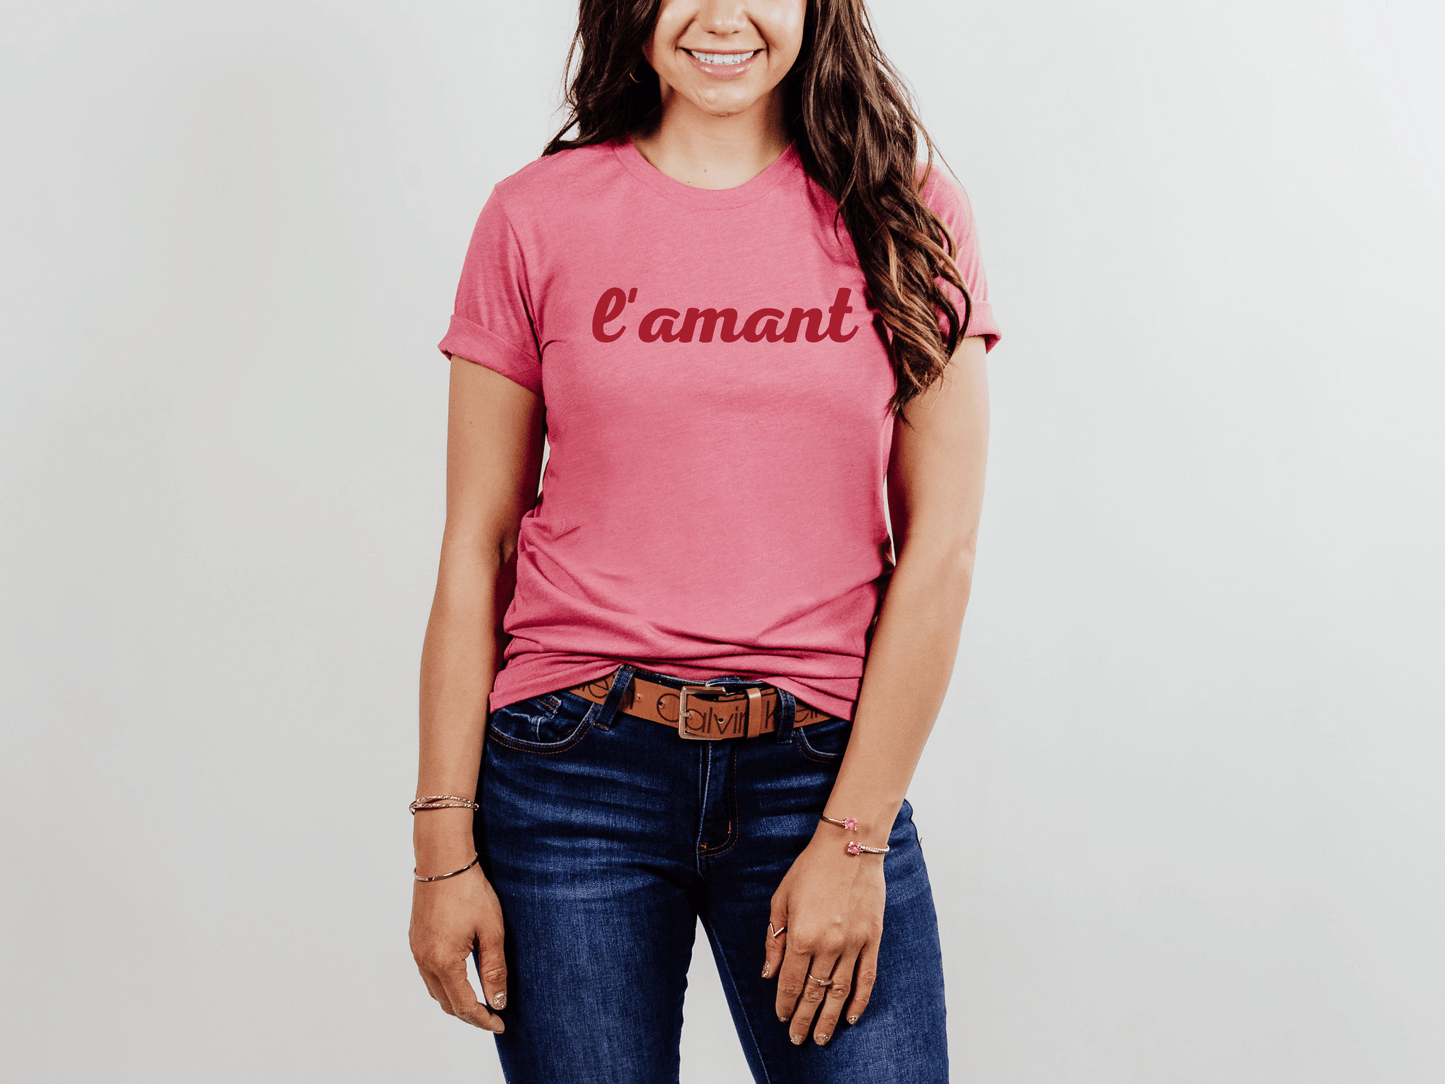 L'amant T-Shirt in Heather Raspberry